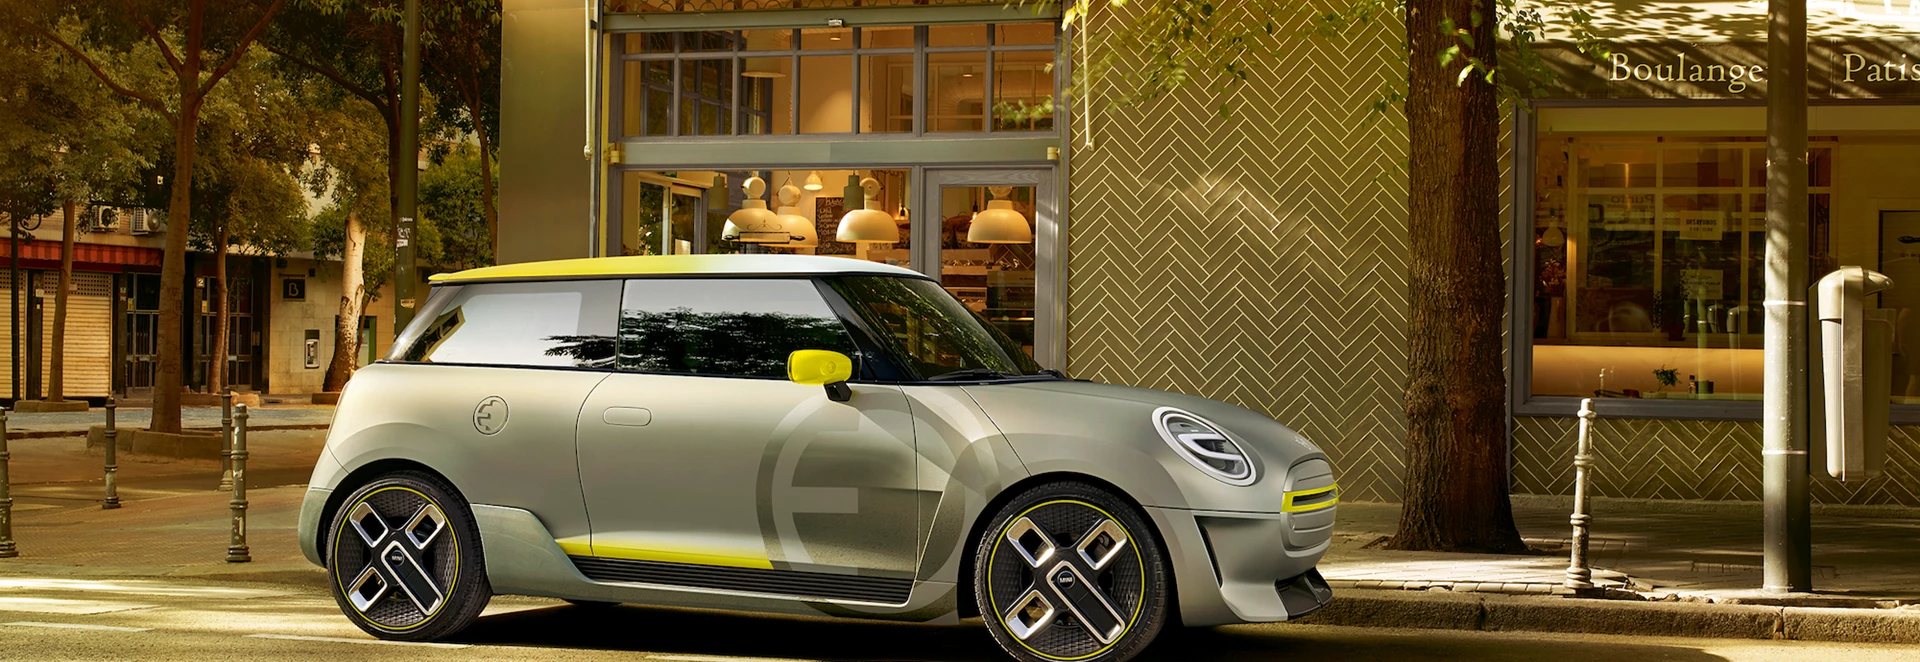 2019 MINI Electric: All you need to about MINI's first EV